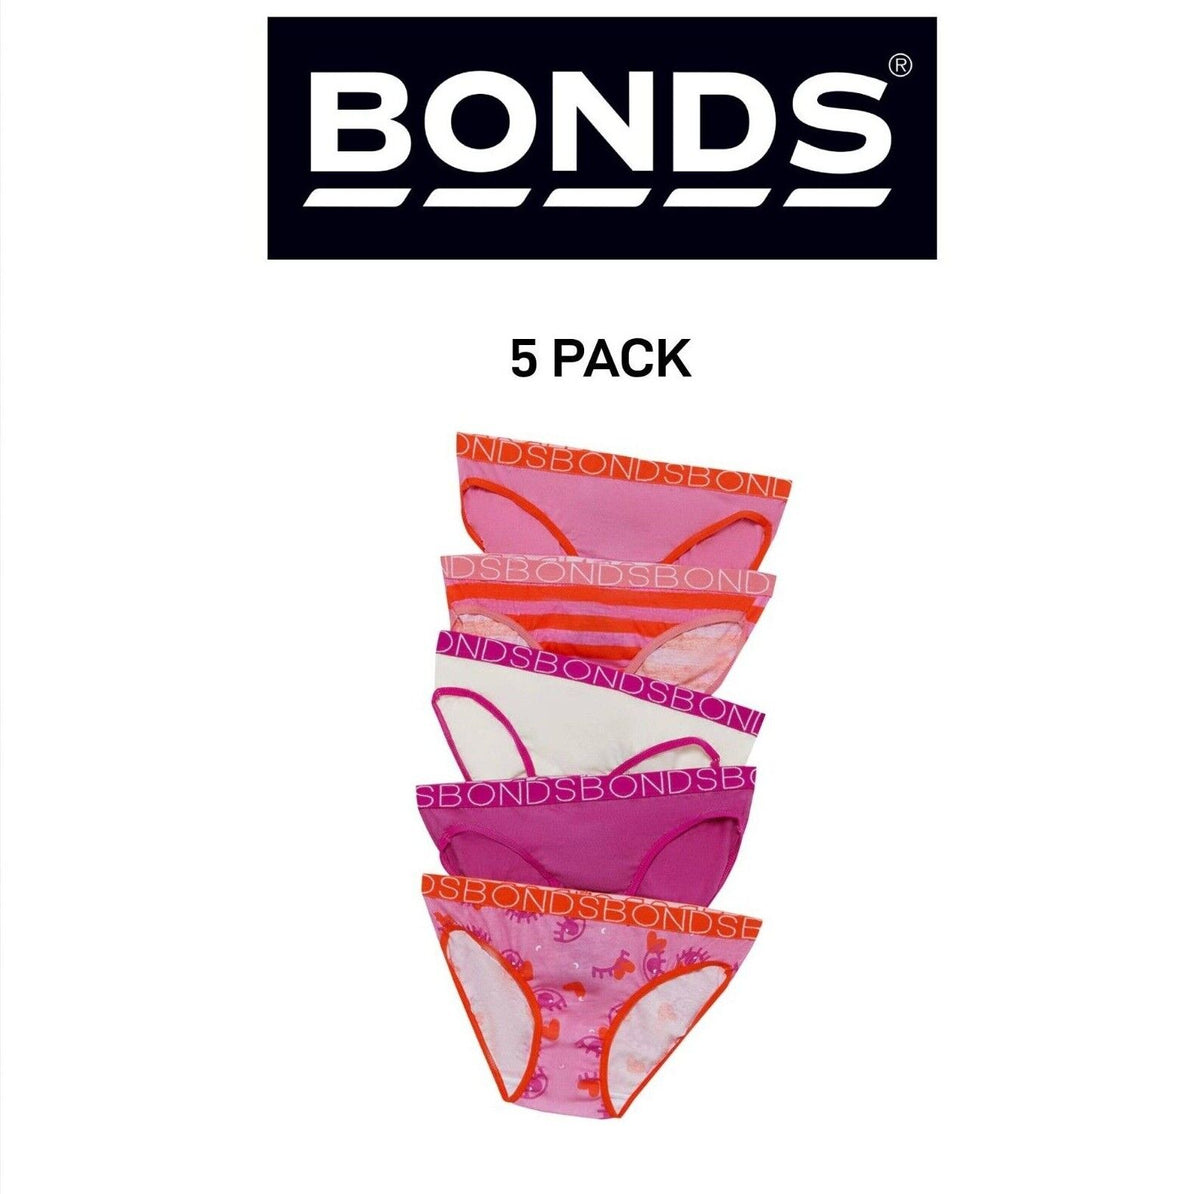 Bonds Girls Bikini Soft and Stretchy Perfect Everyday Coverage 5 Pack UWNV5A